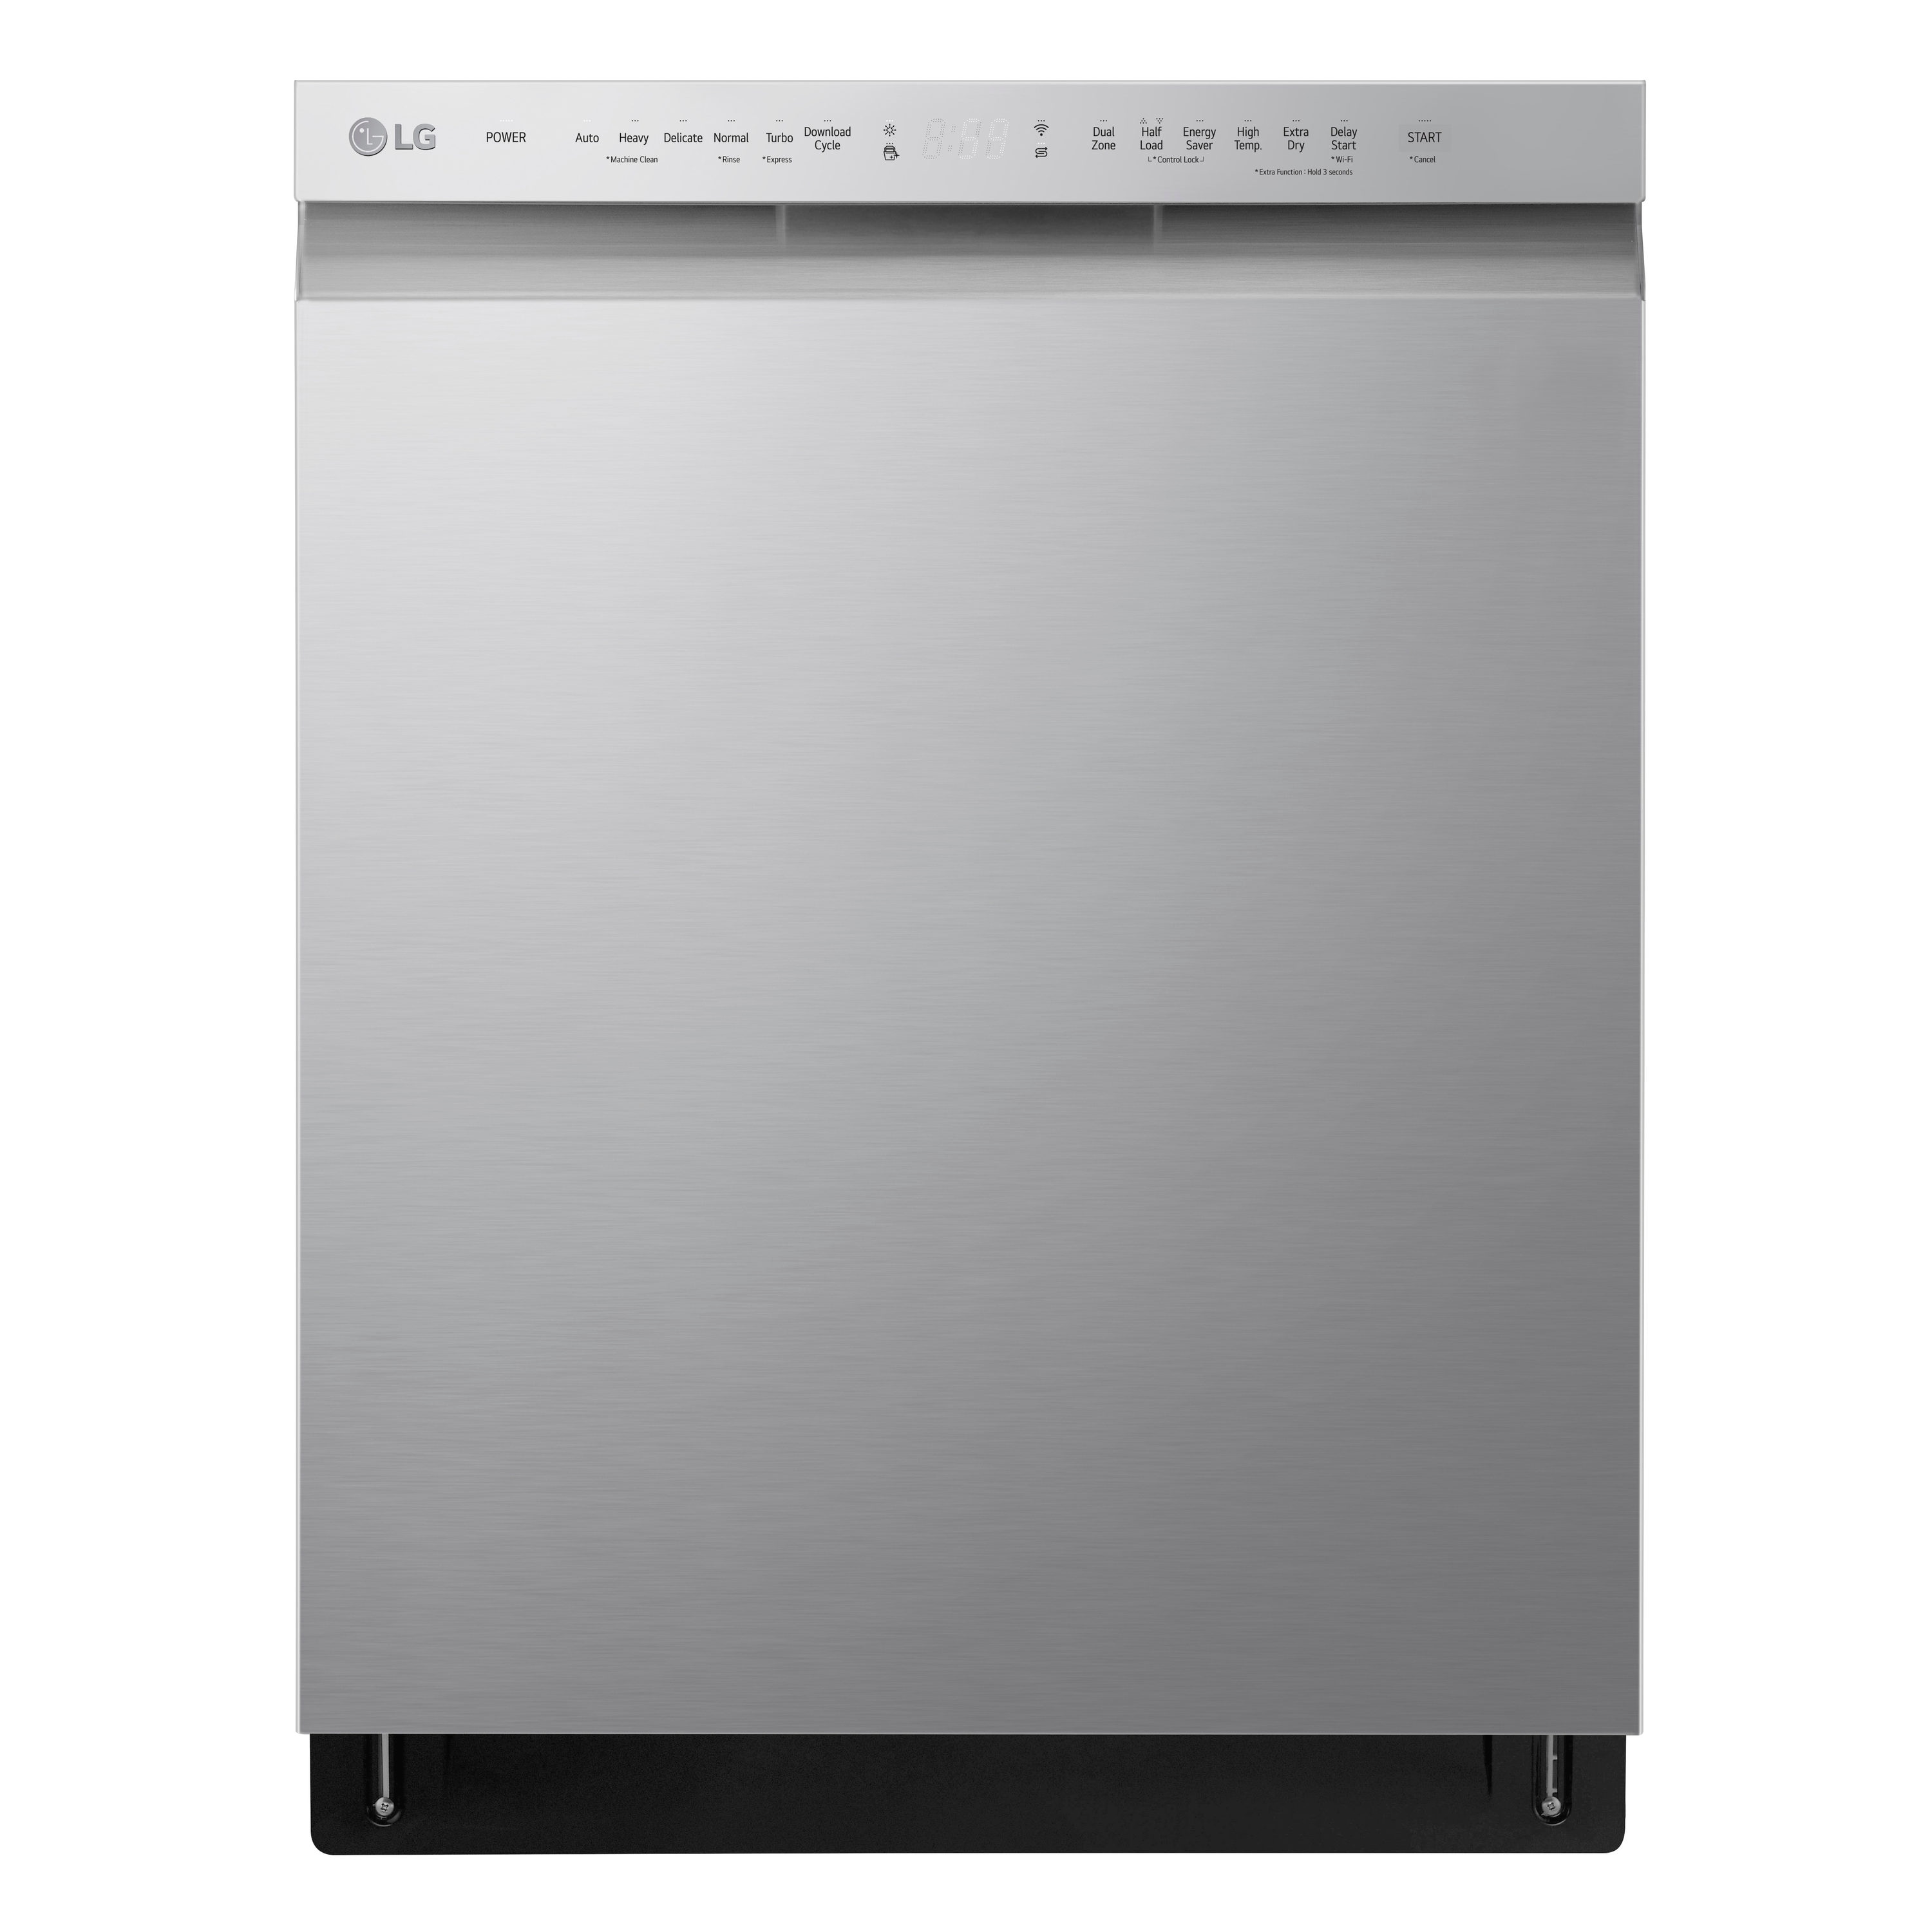 LG ADFD5448AT Front Control Smart Wi-Fi Enabled Dishwasher with QuadWash - Stainless Steel